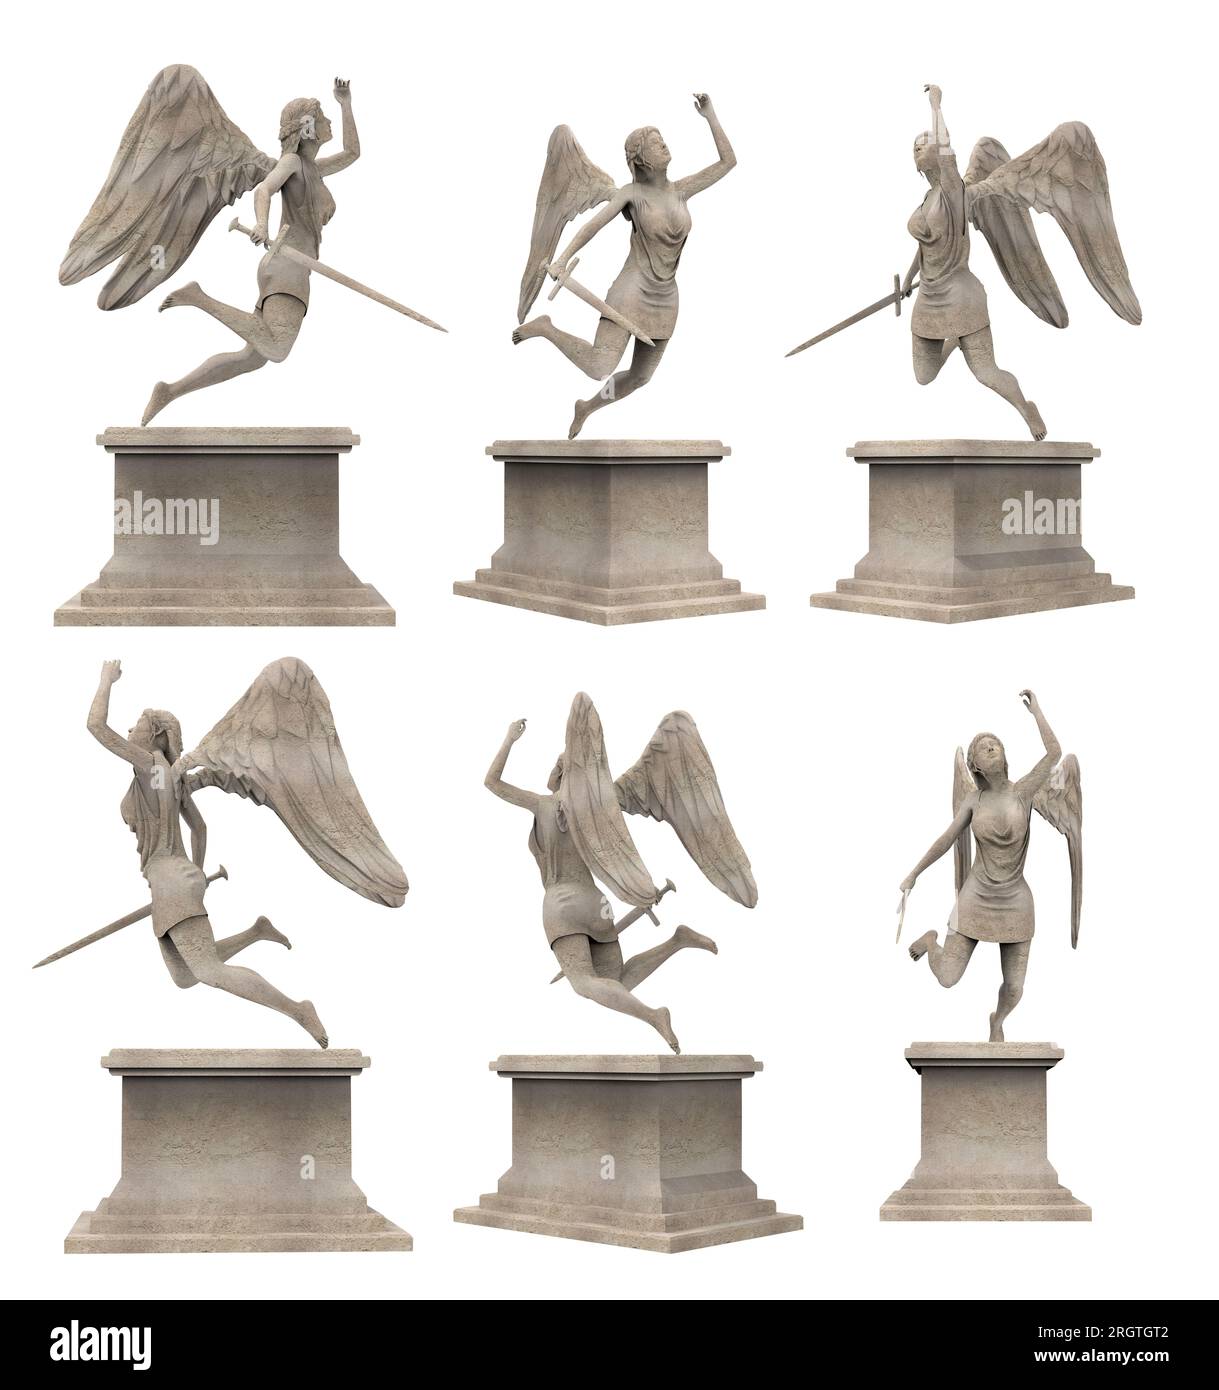 Isolated 3d render illustration of antique ancient stone flying angel warrior statue on pedestal holding sword, various angles. Stock Photo